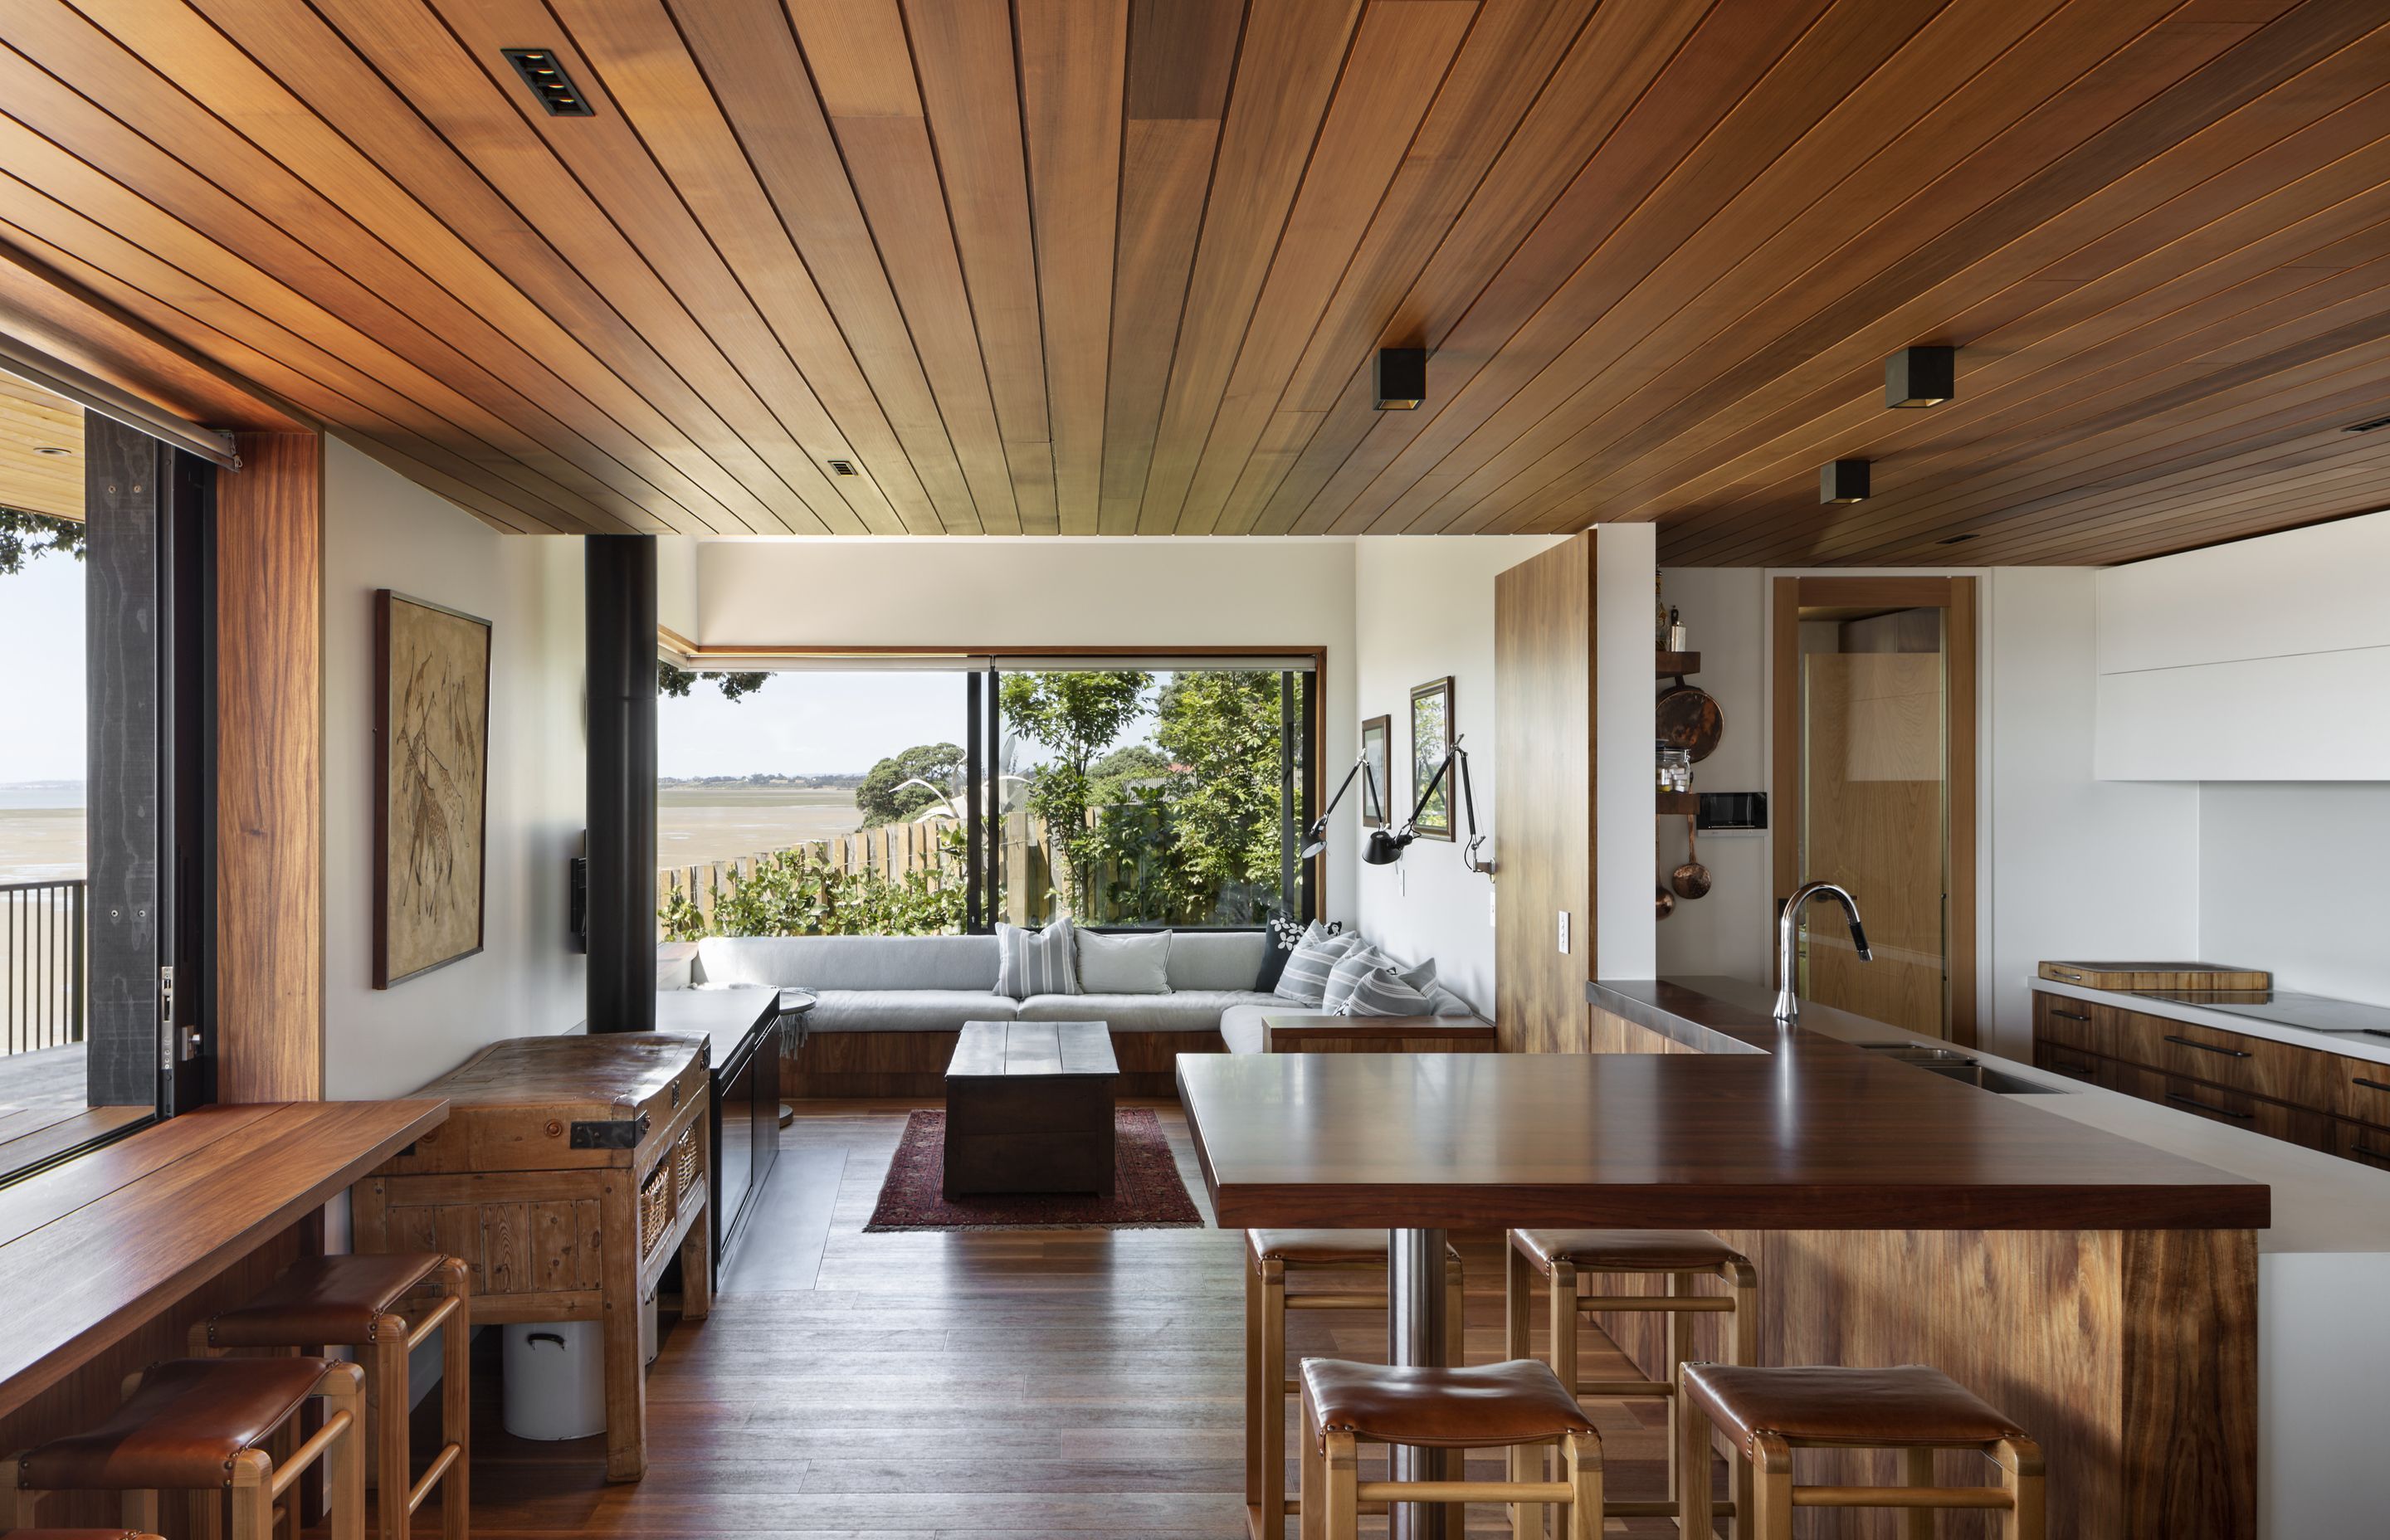 Seaside Barn by VDP Construction | ArchiPro NZ